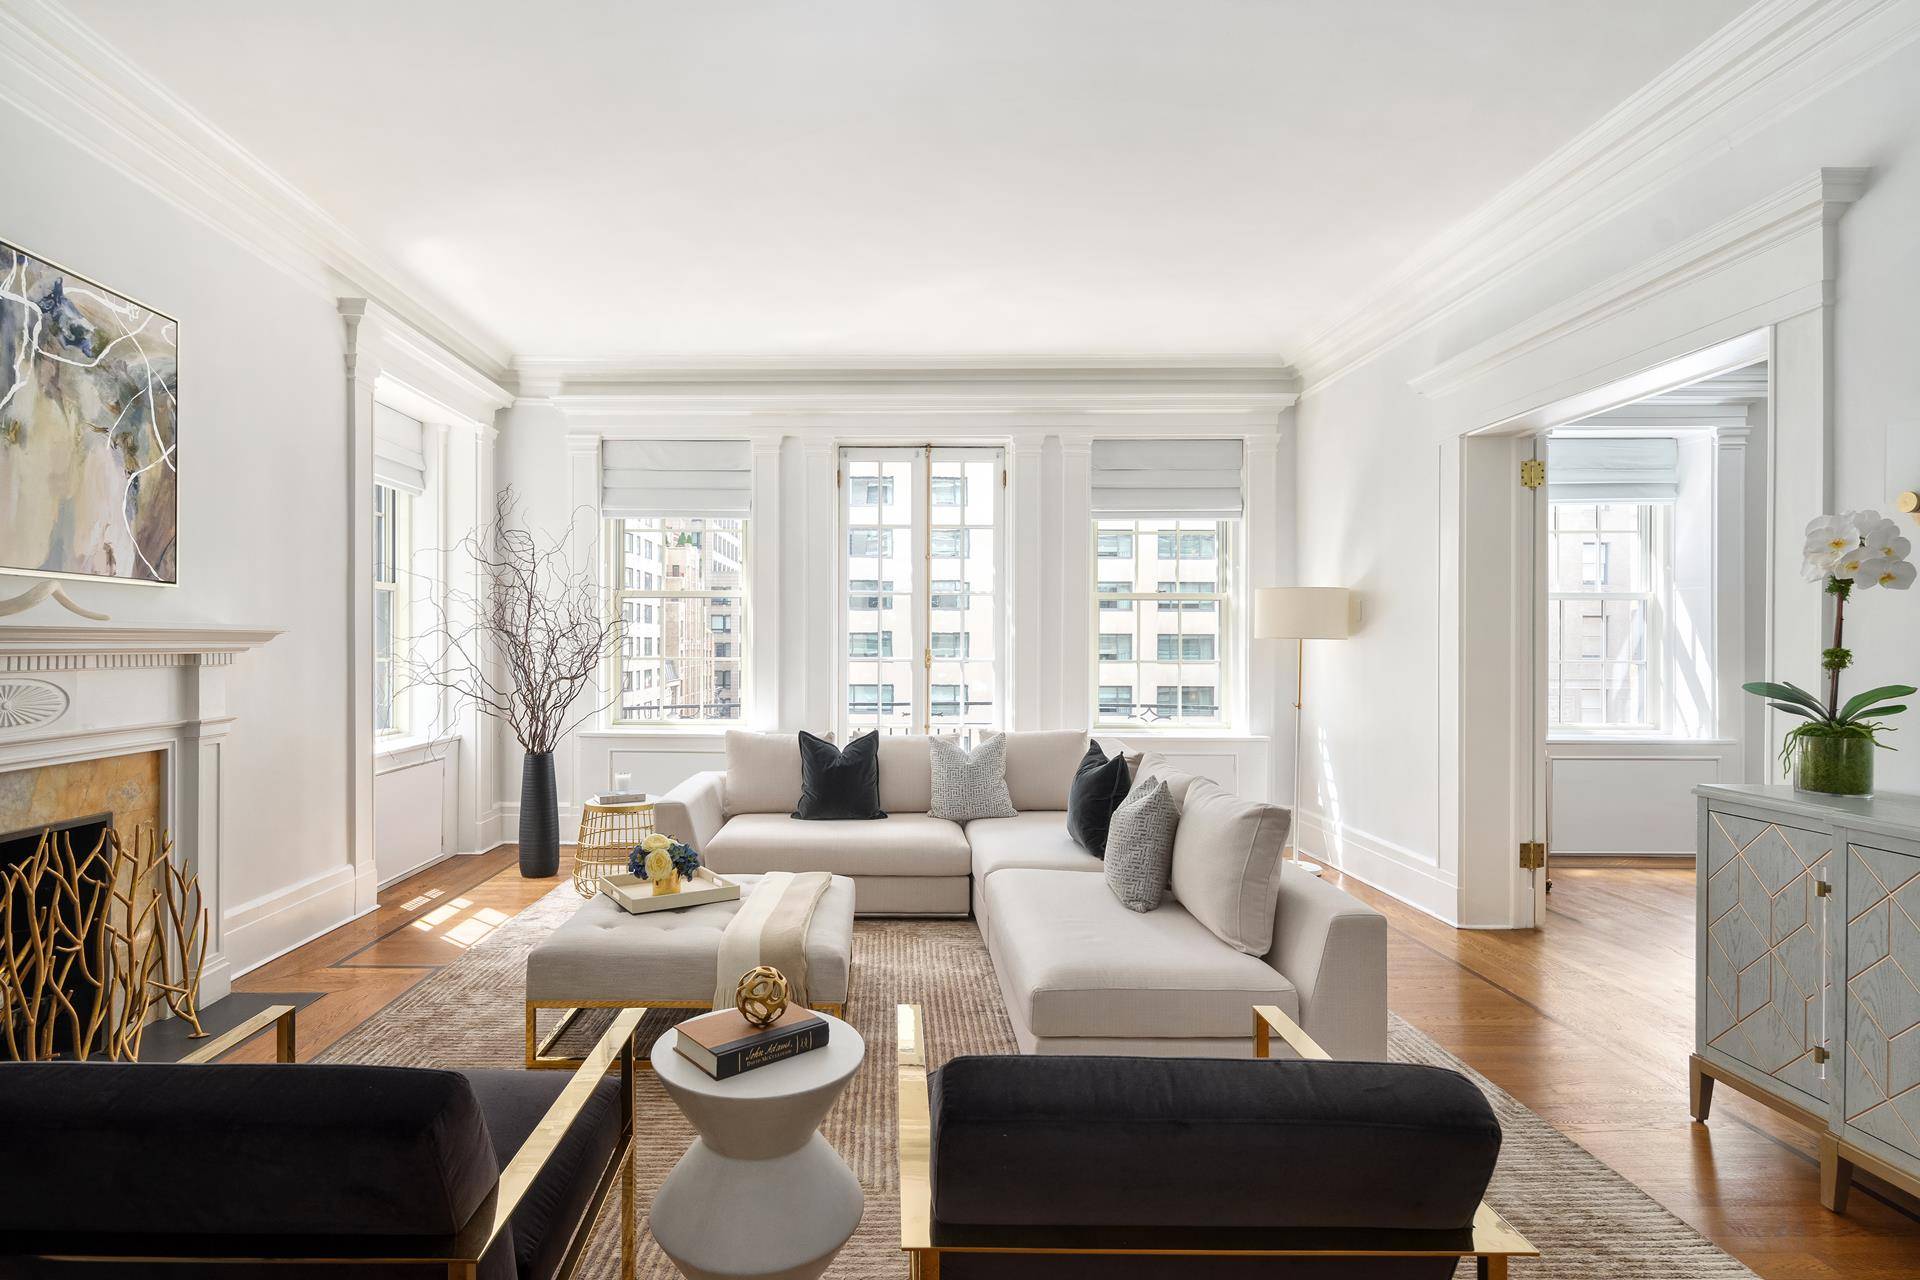 Grand 12 room duplex apartment in premier white glove Park Avenue cooperative offering 5 bedrooms and 4.